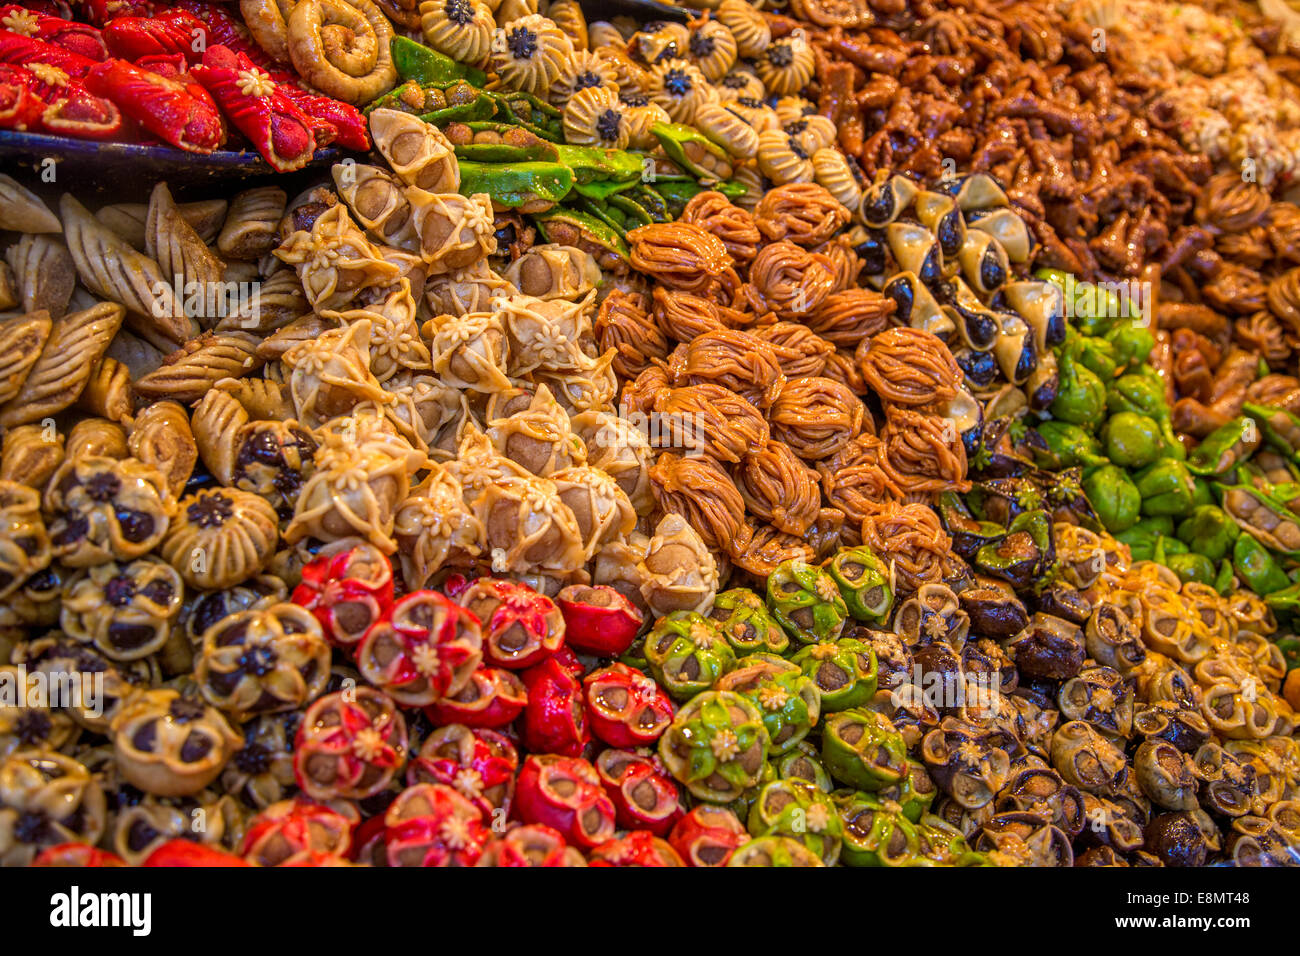 Sweets on the moroccan market Stock Photo